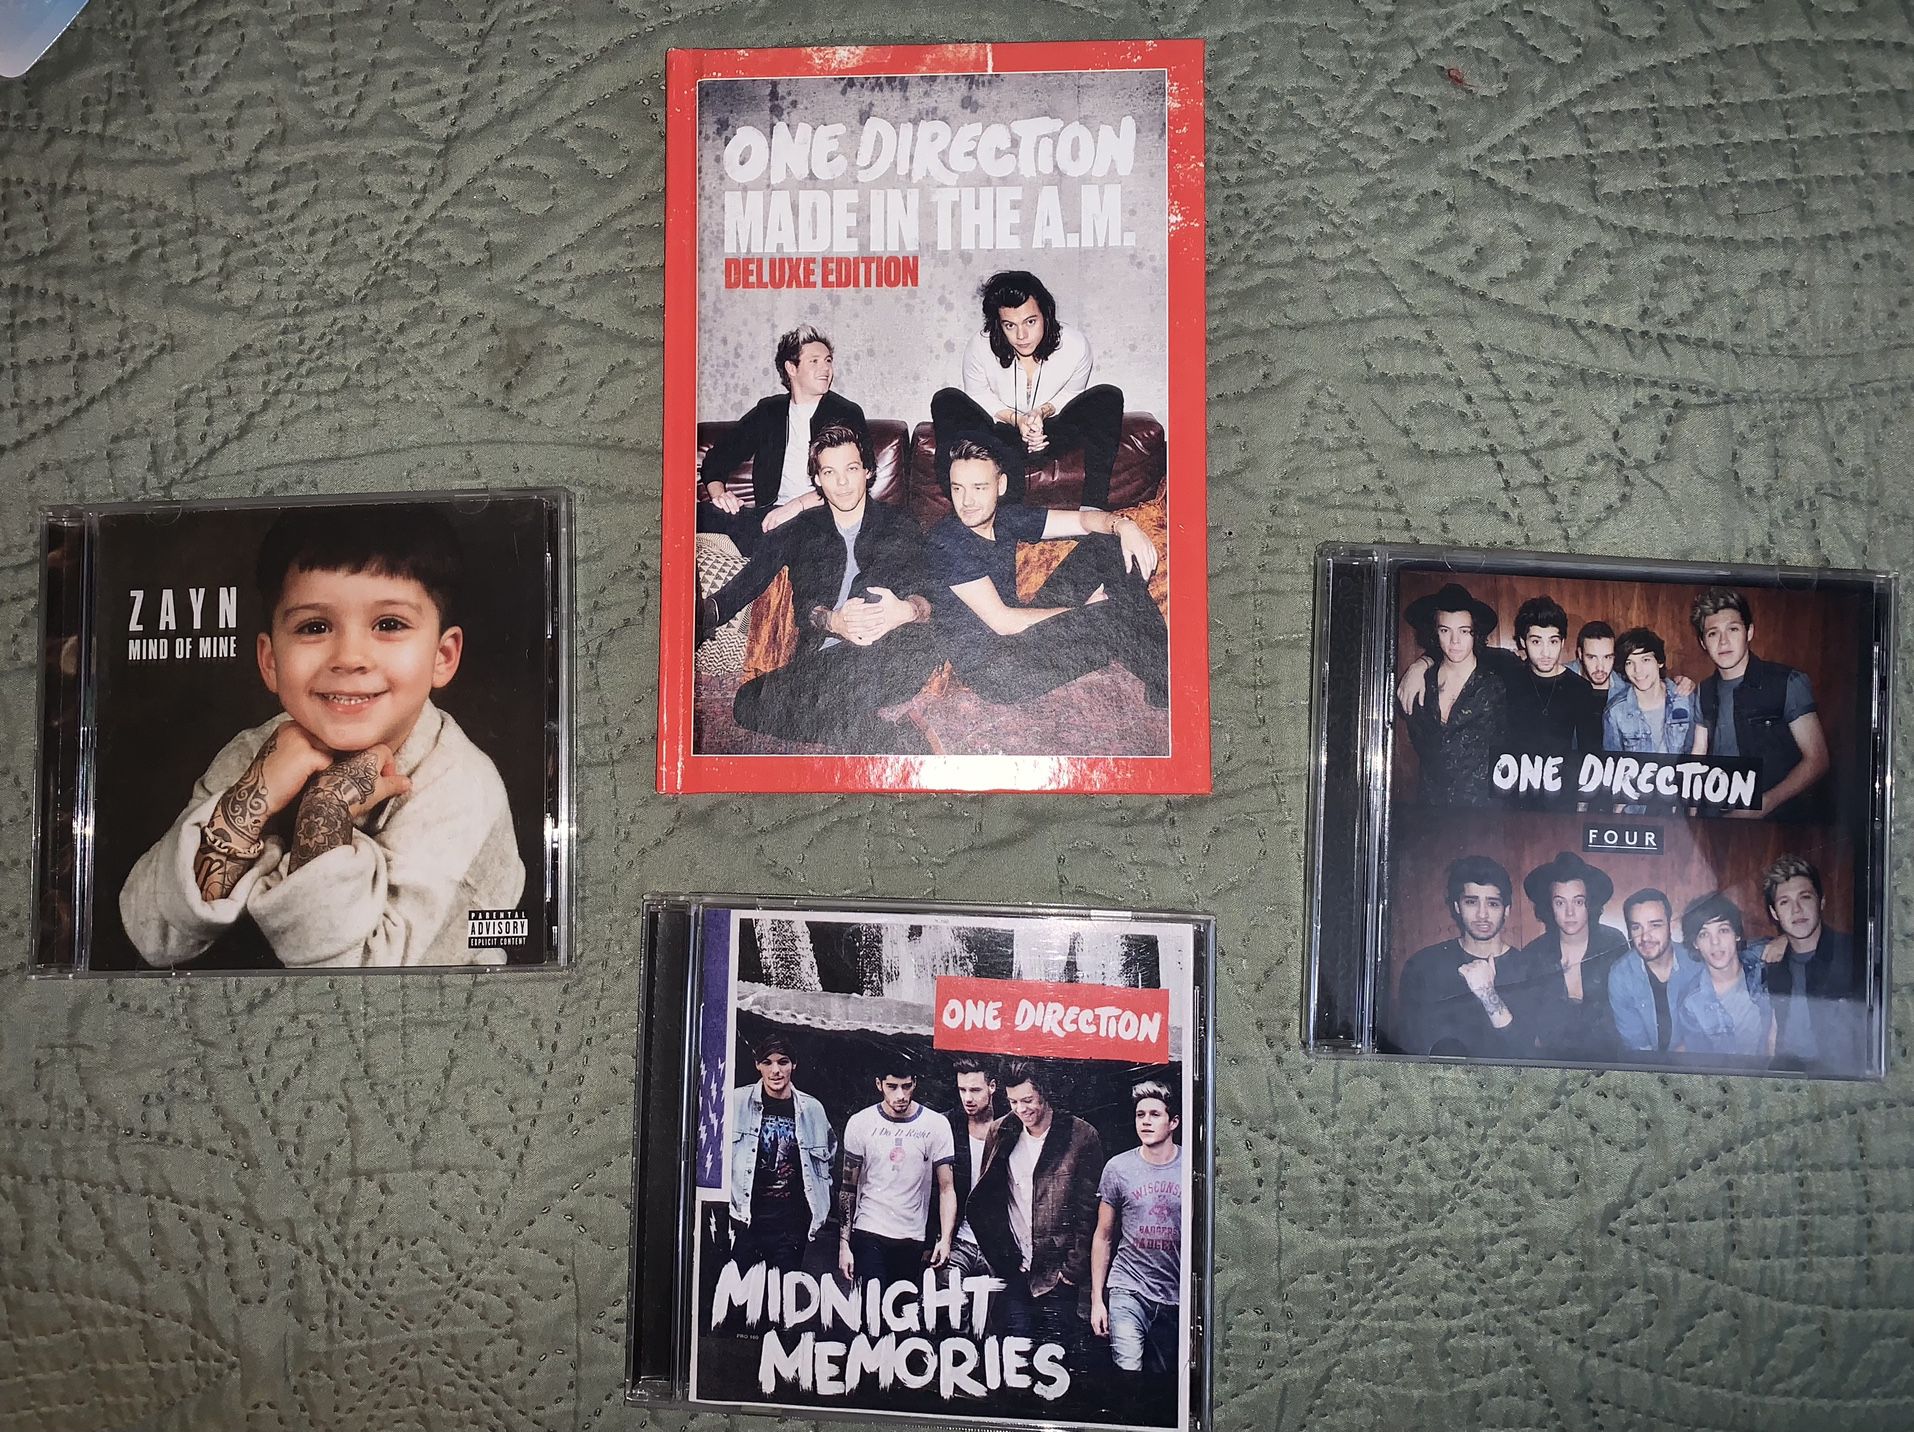 One Direction Albums & Movie